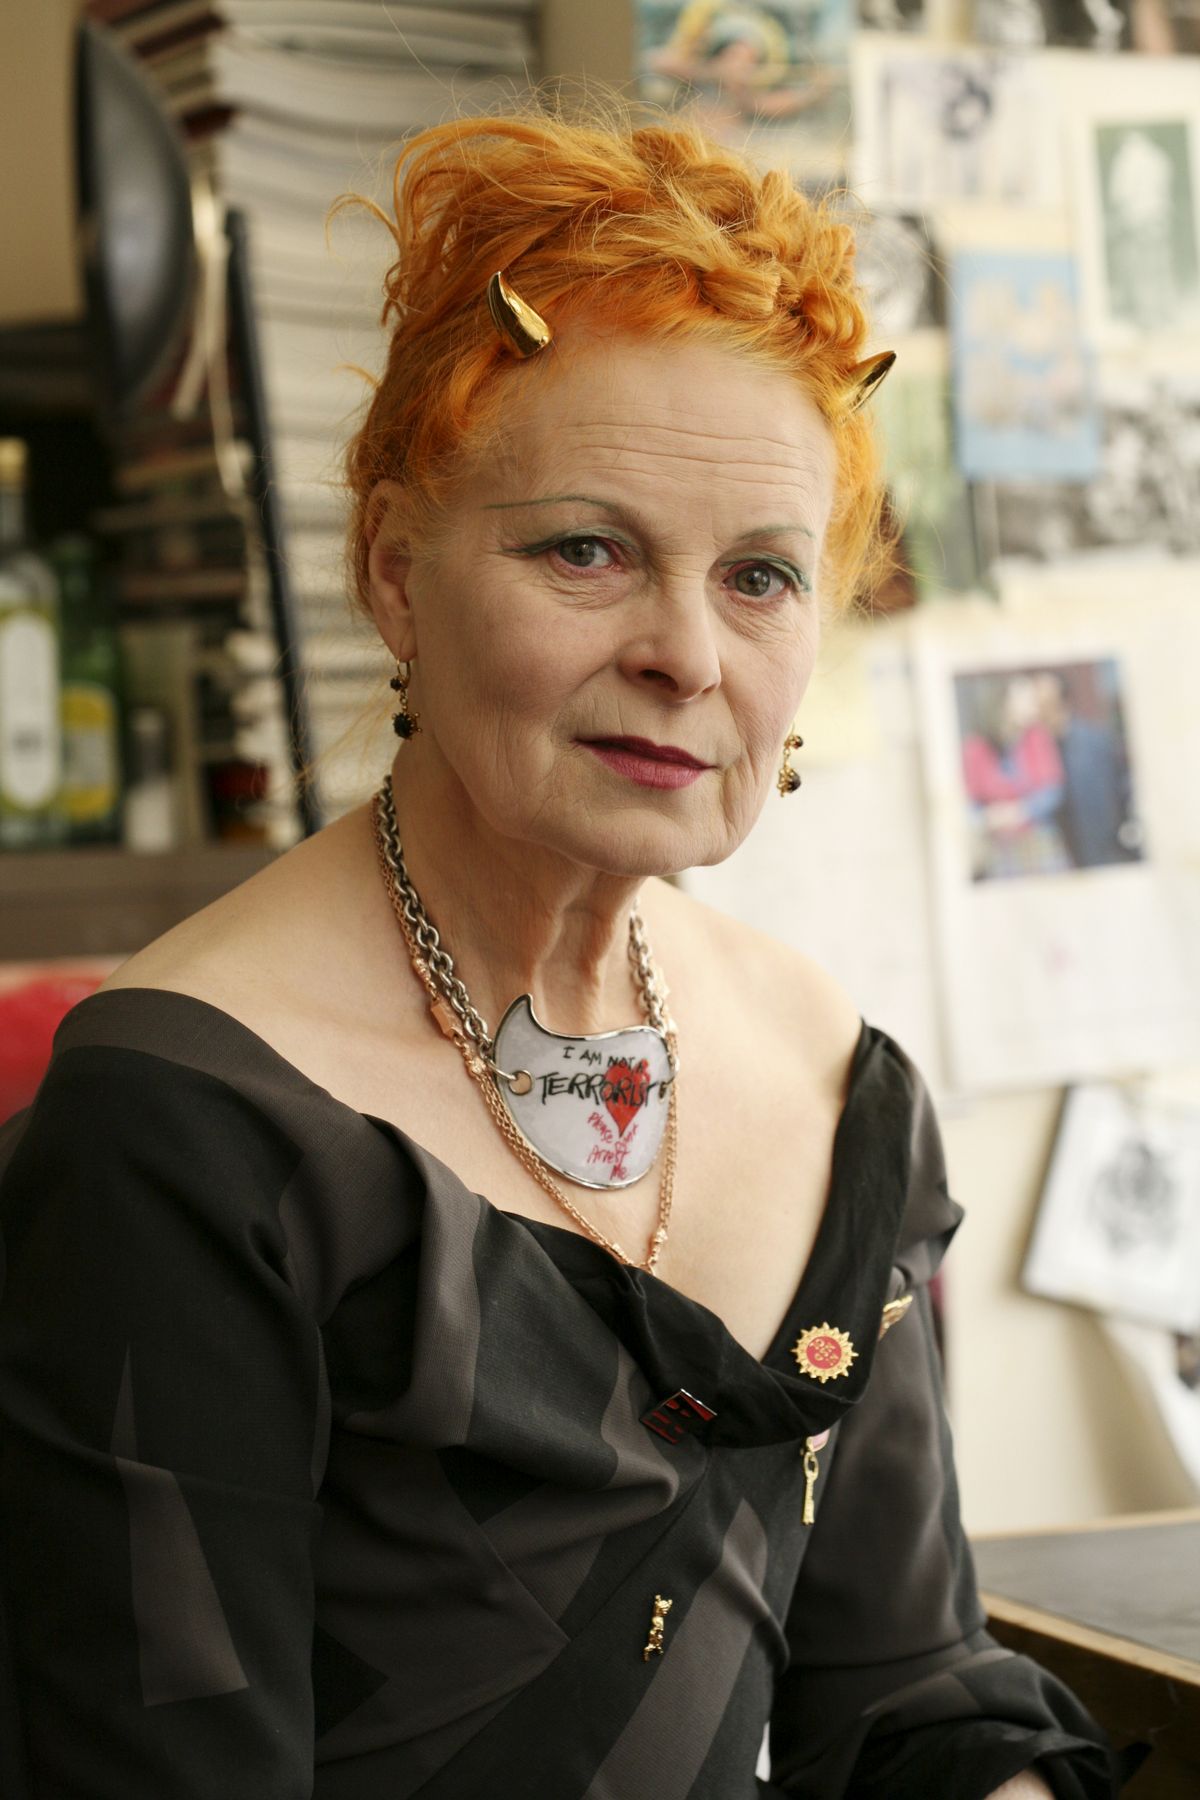 Vivienne Westwood, 81, Dies; Brought Provocative Punk Style to